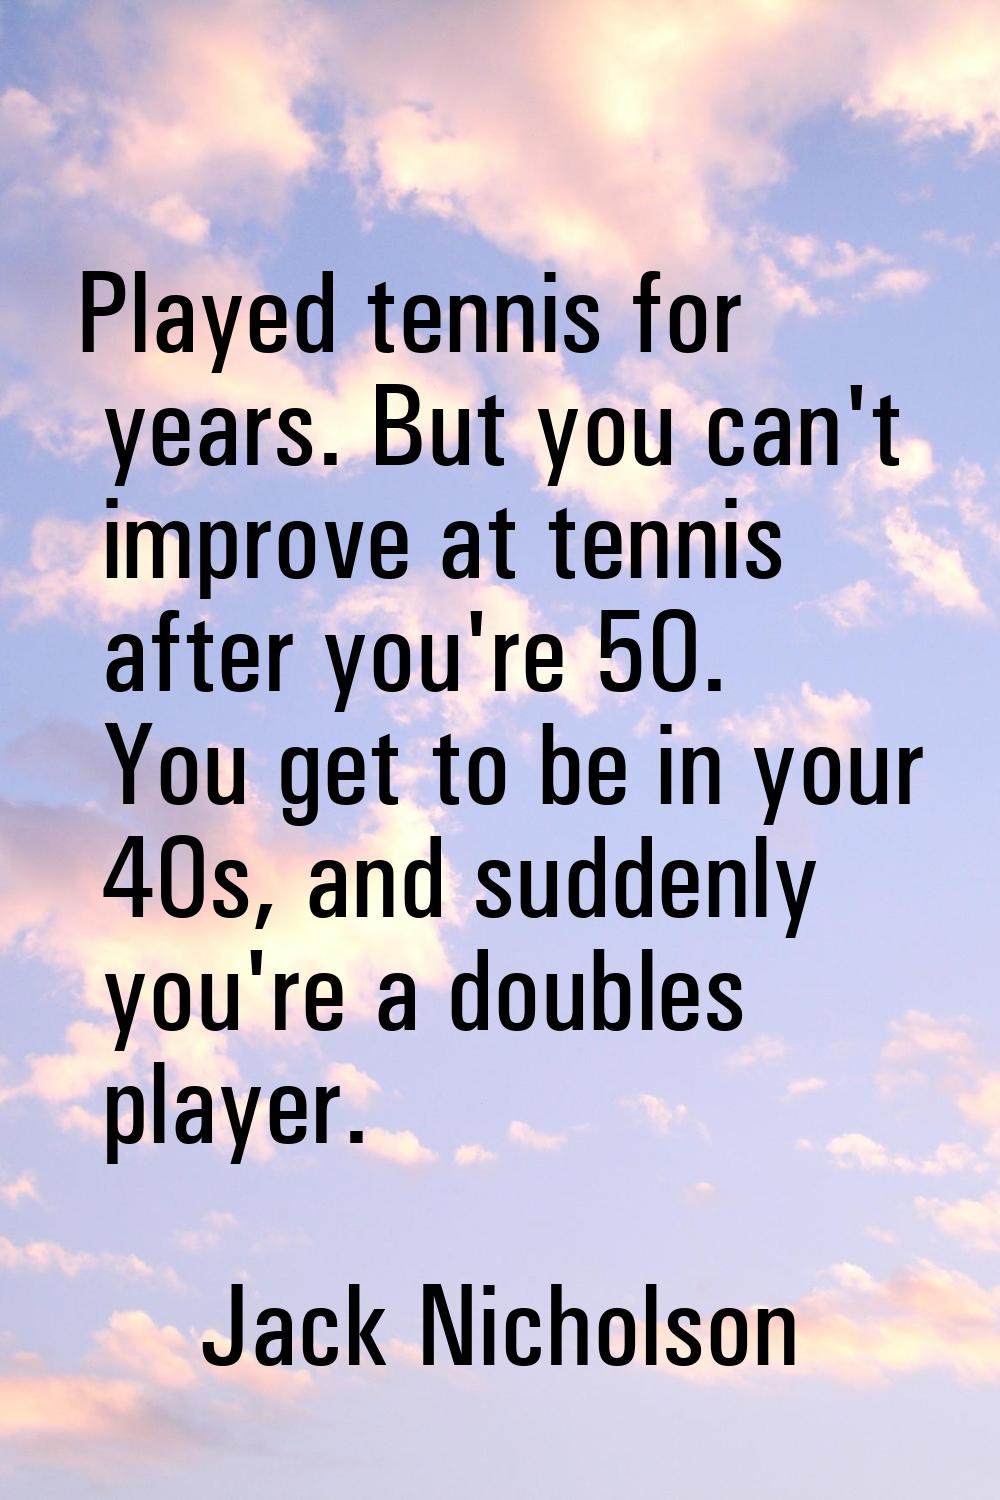 Played tennis for years. But you can't improve at tennis after you're 50. You get to be in your 40s